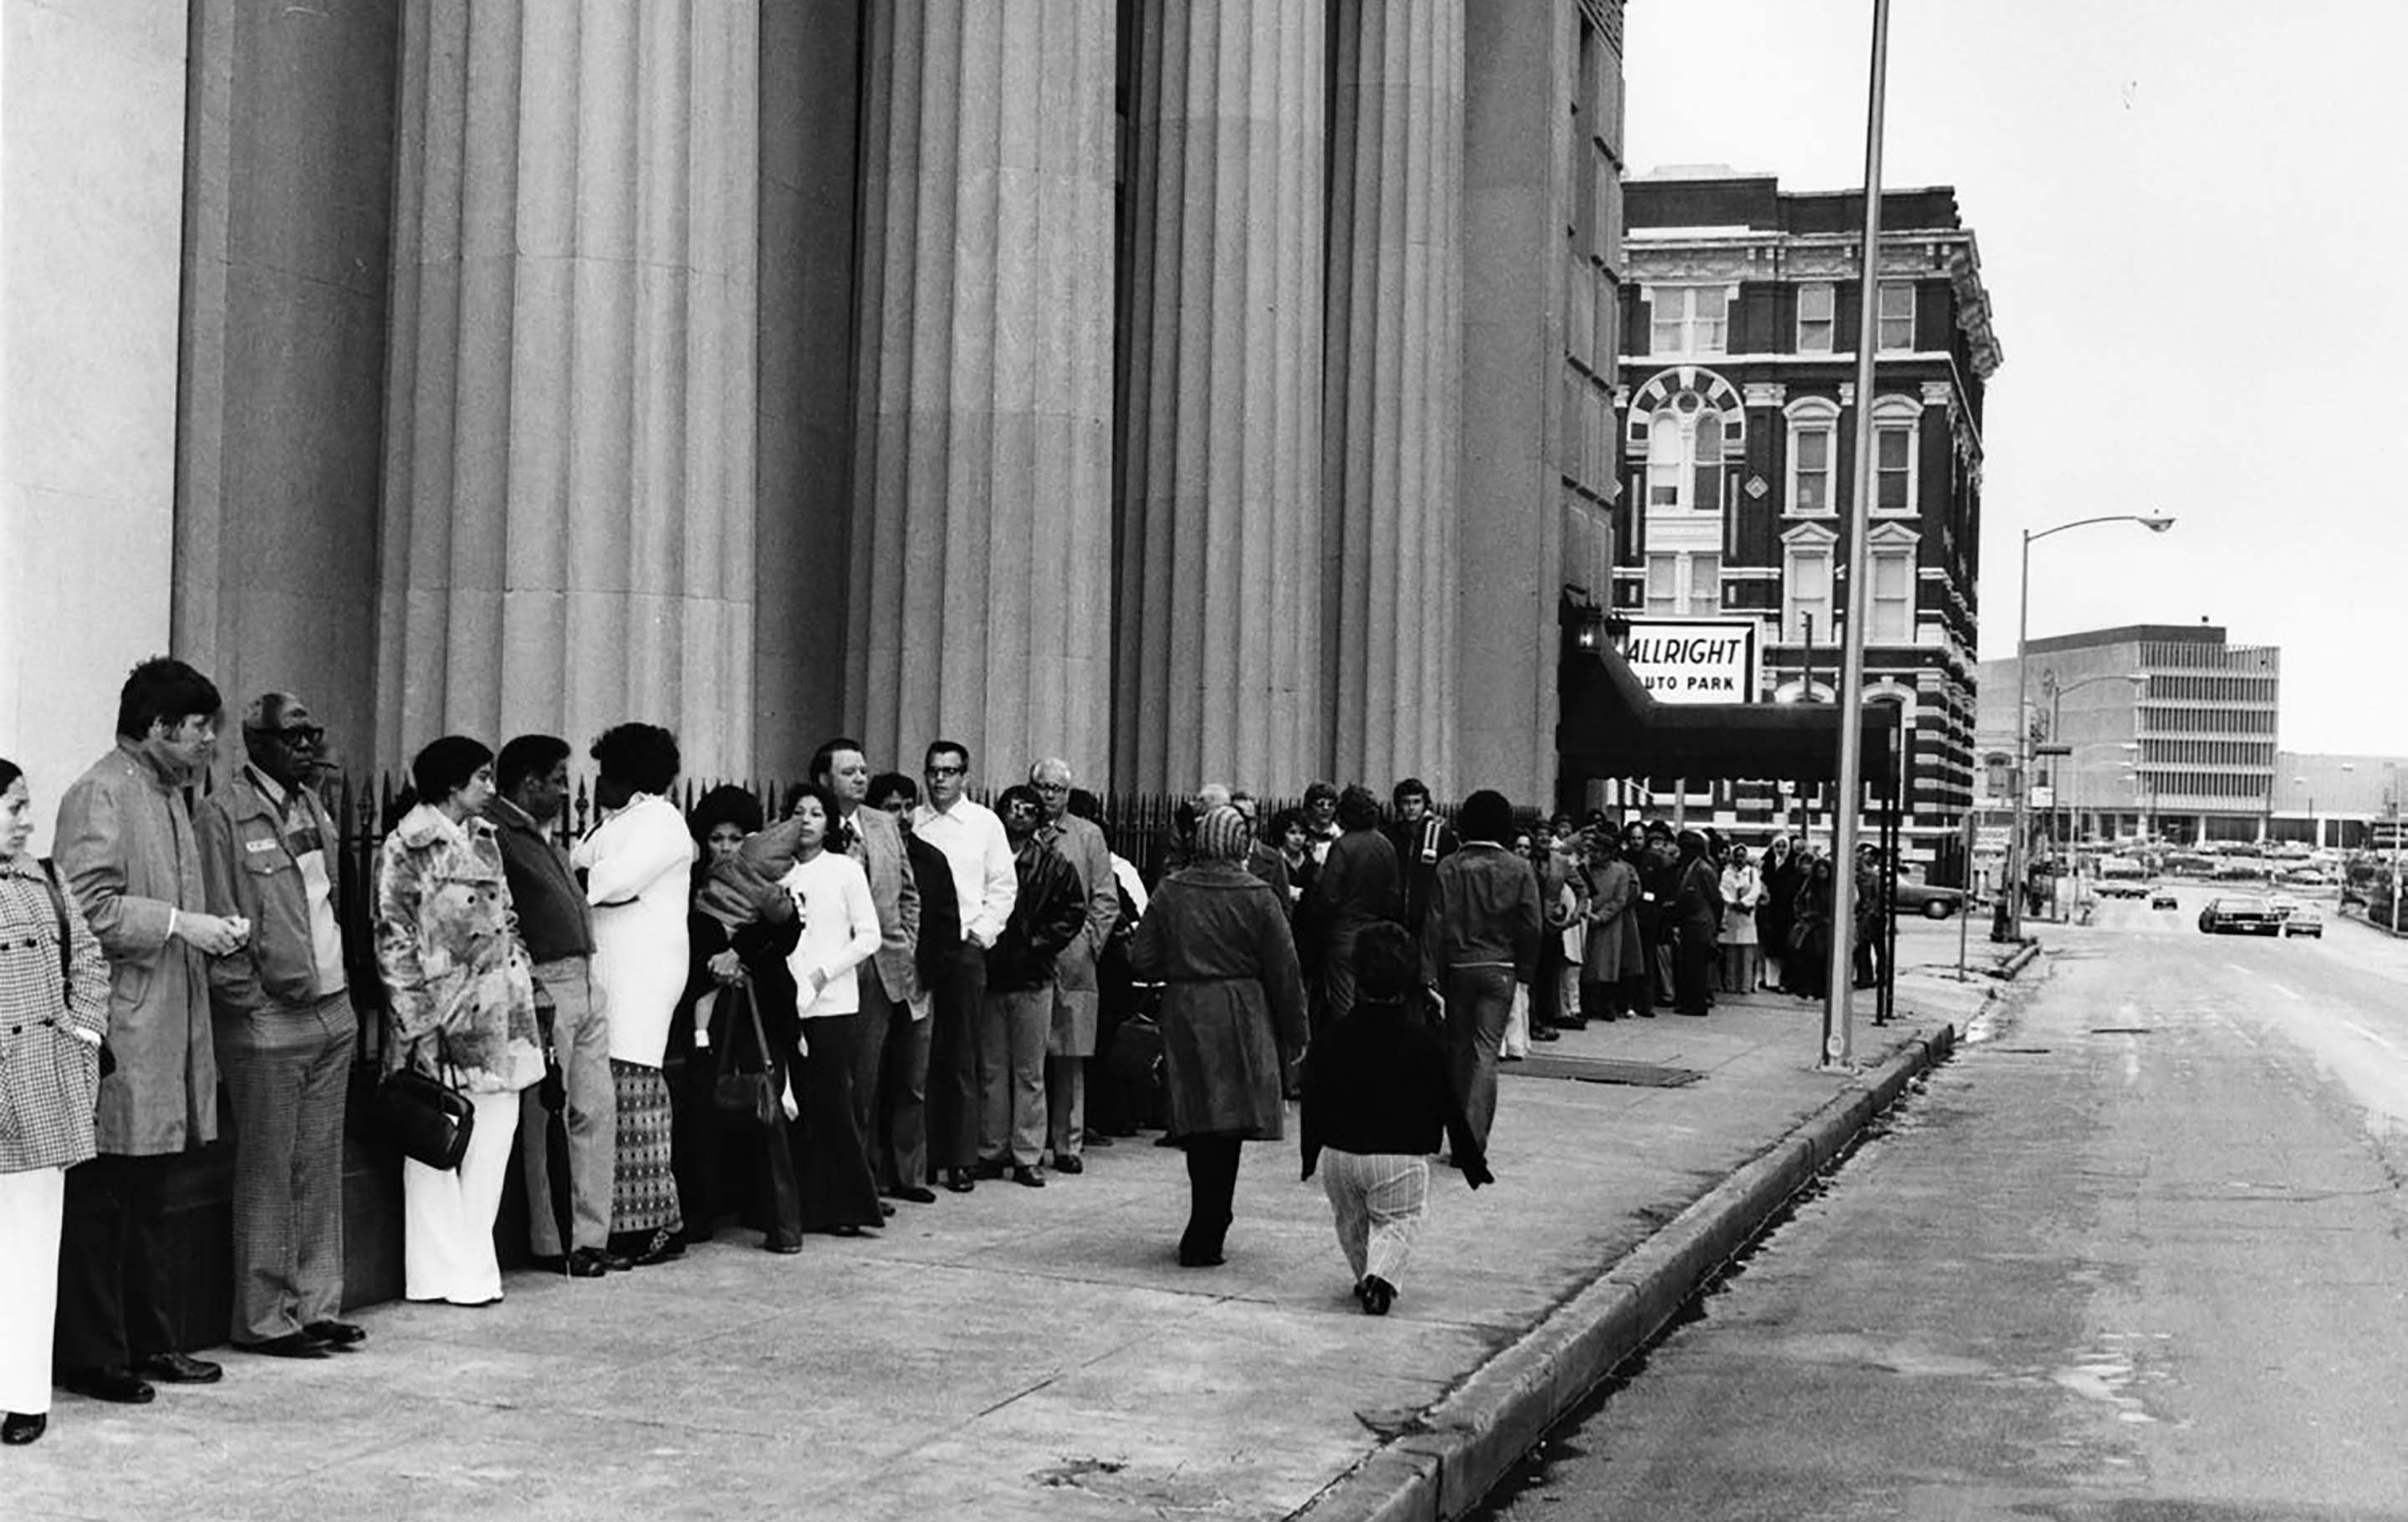 People lined up in front of a Franklin National Bank